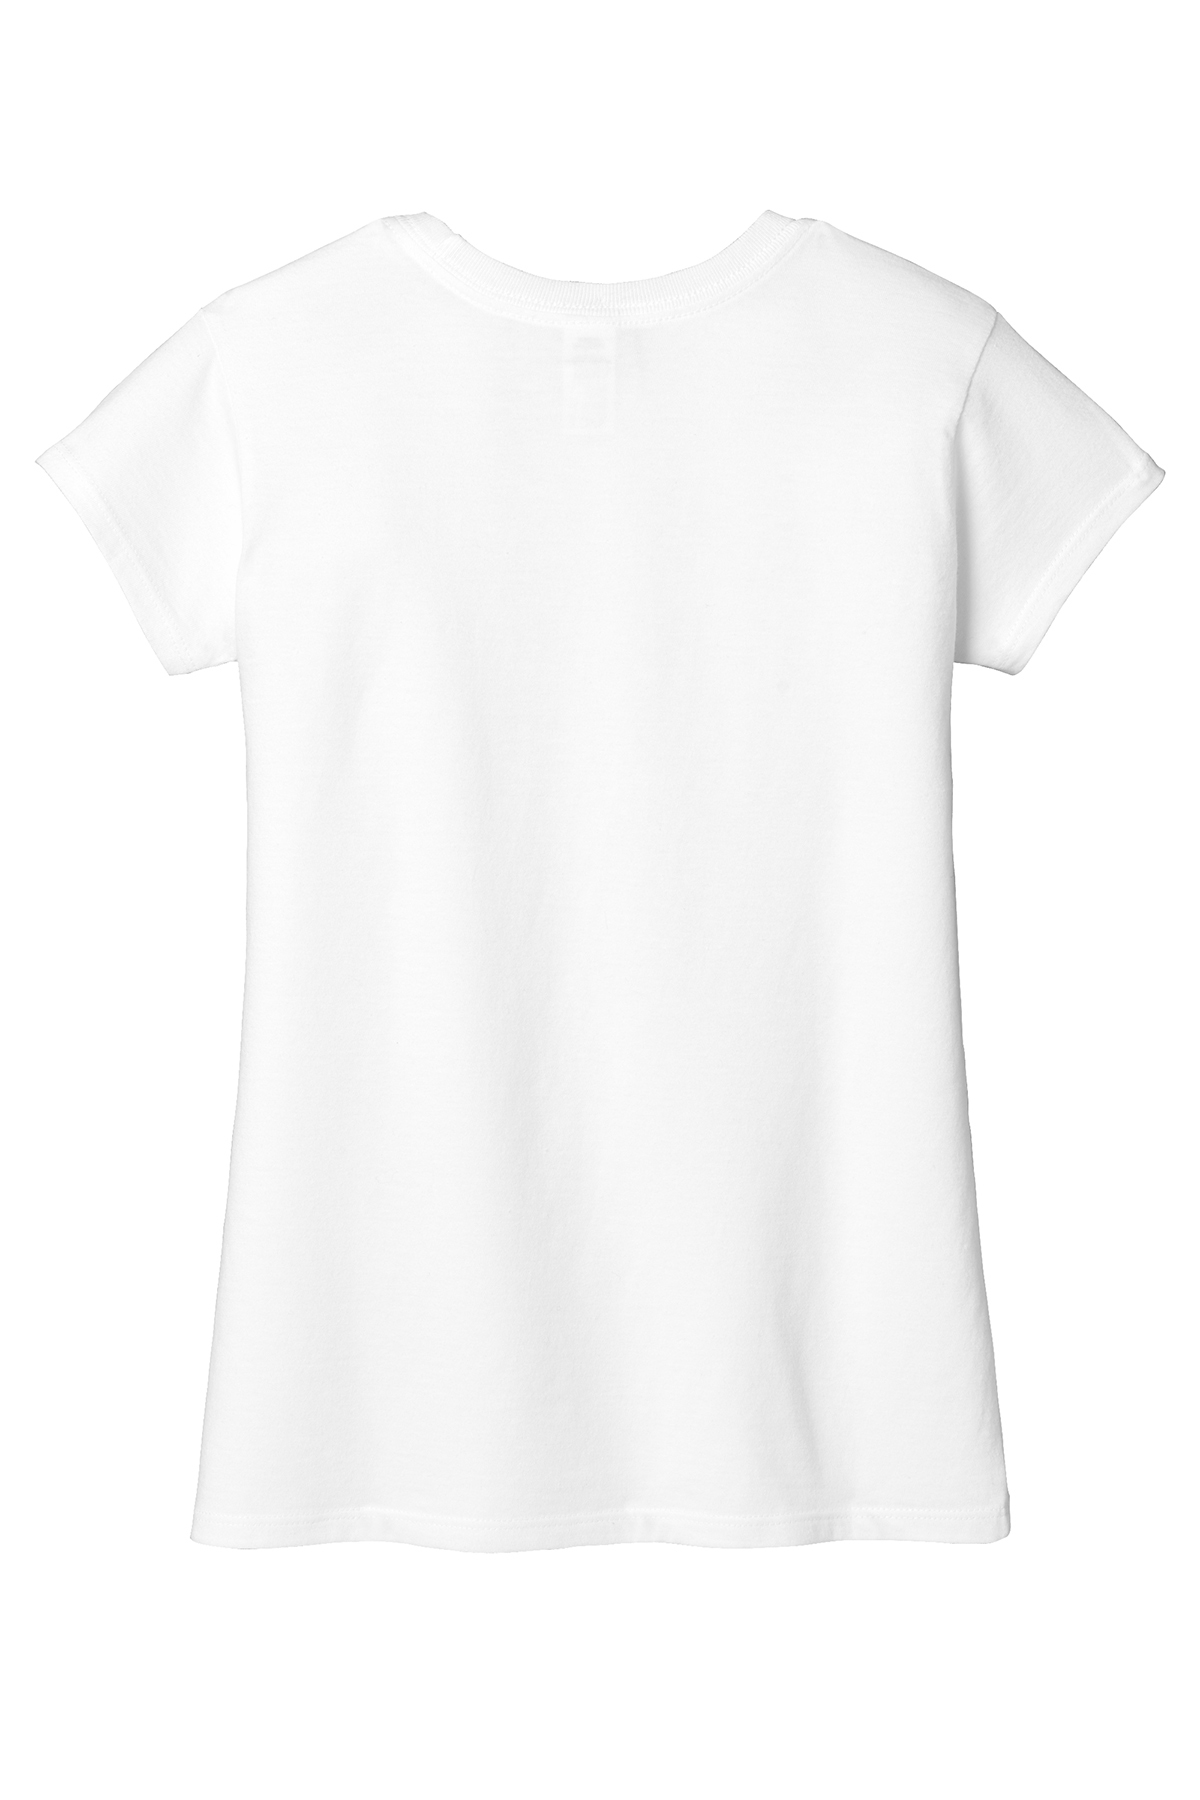 District Girls Very Important Tee | Product | SanMar